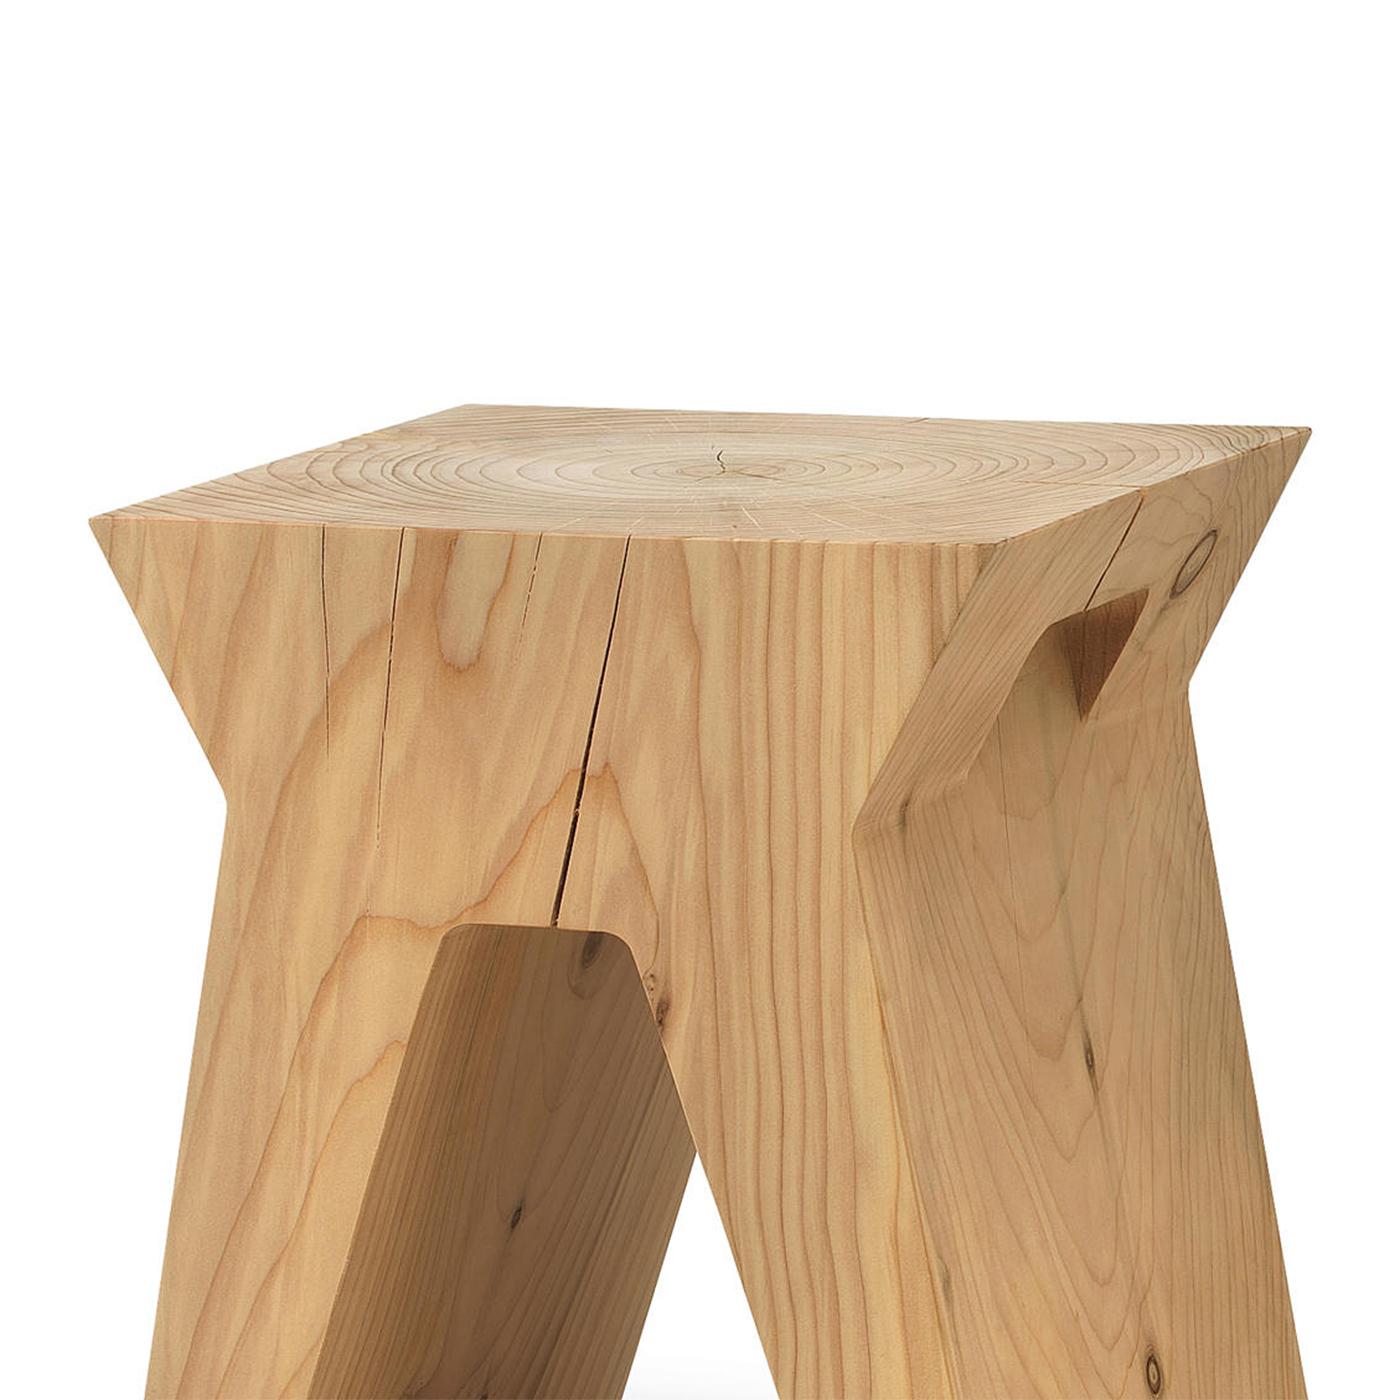 Stool temple made in a block of natural
solid cedar trunk. Treated with wax with natural
pine extracts.
Solid cedar wood include movement, 
cracks and changes in wood conditions, 
this is the essential characteristic of natural 
solid cedar wood due